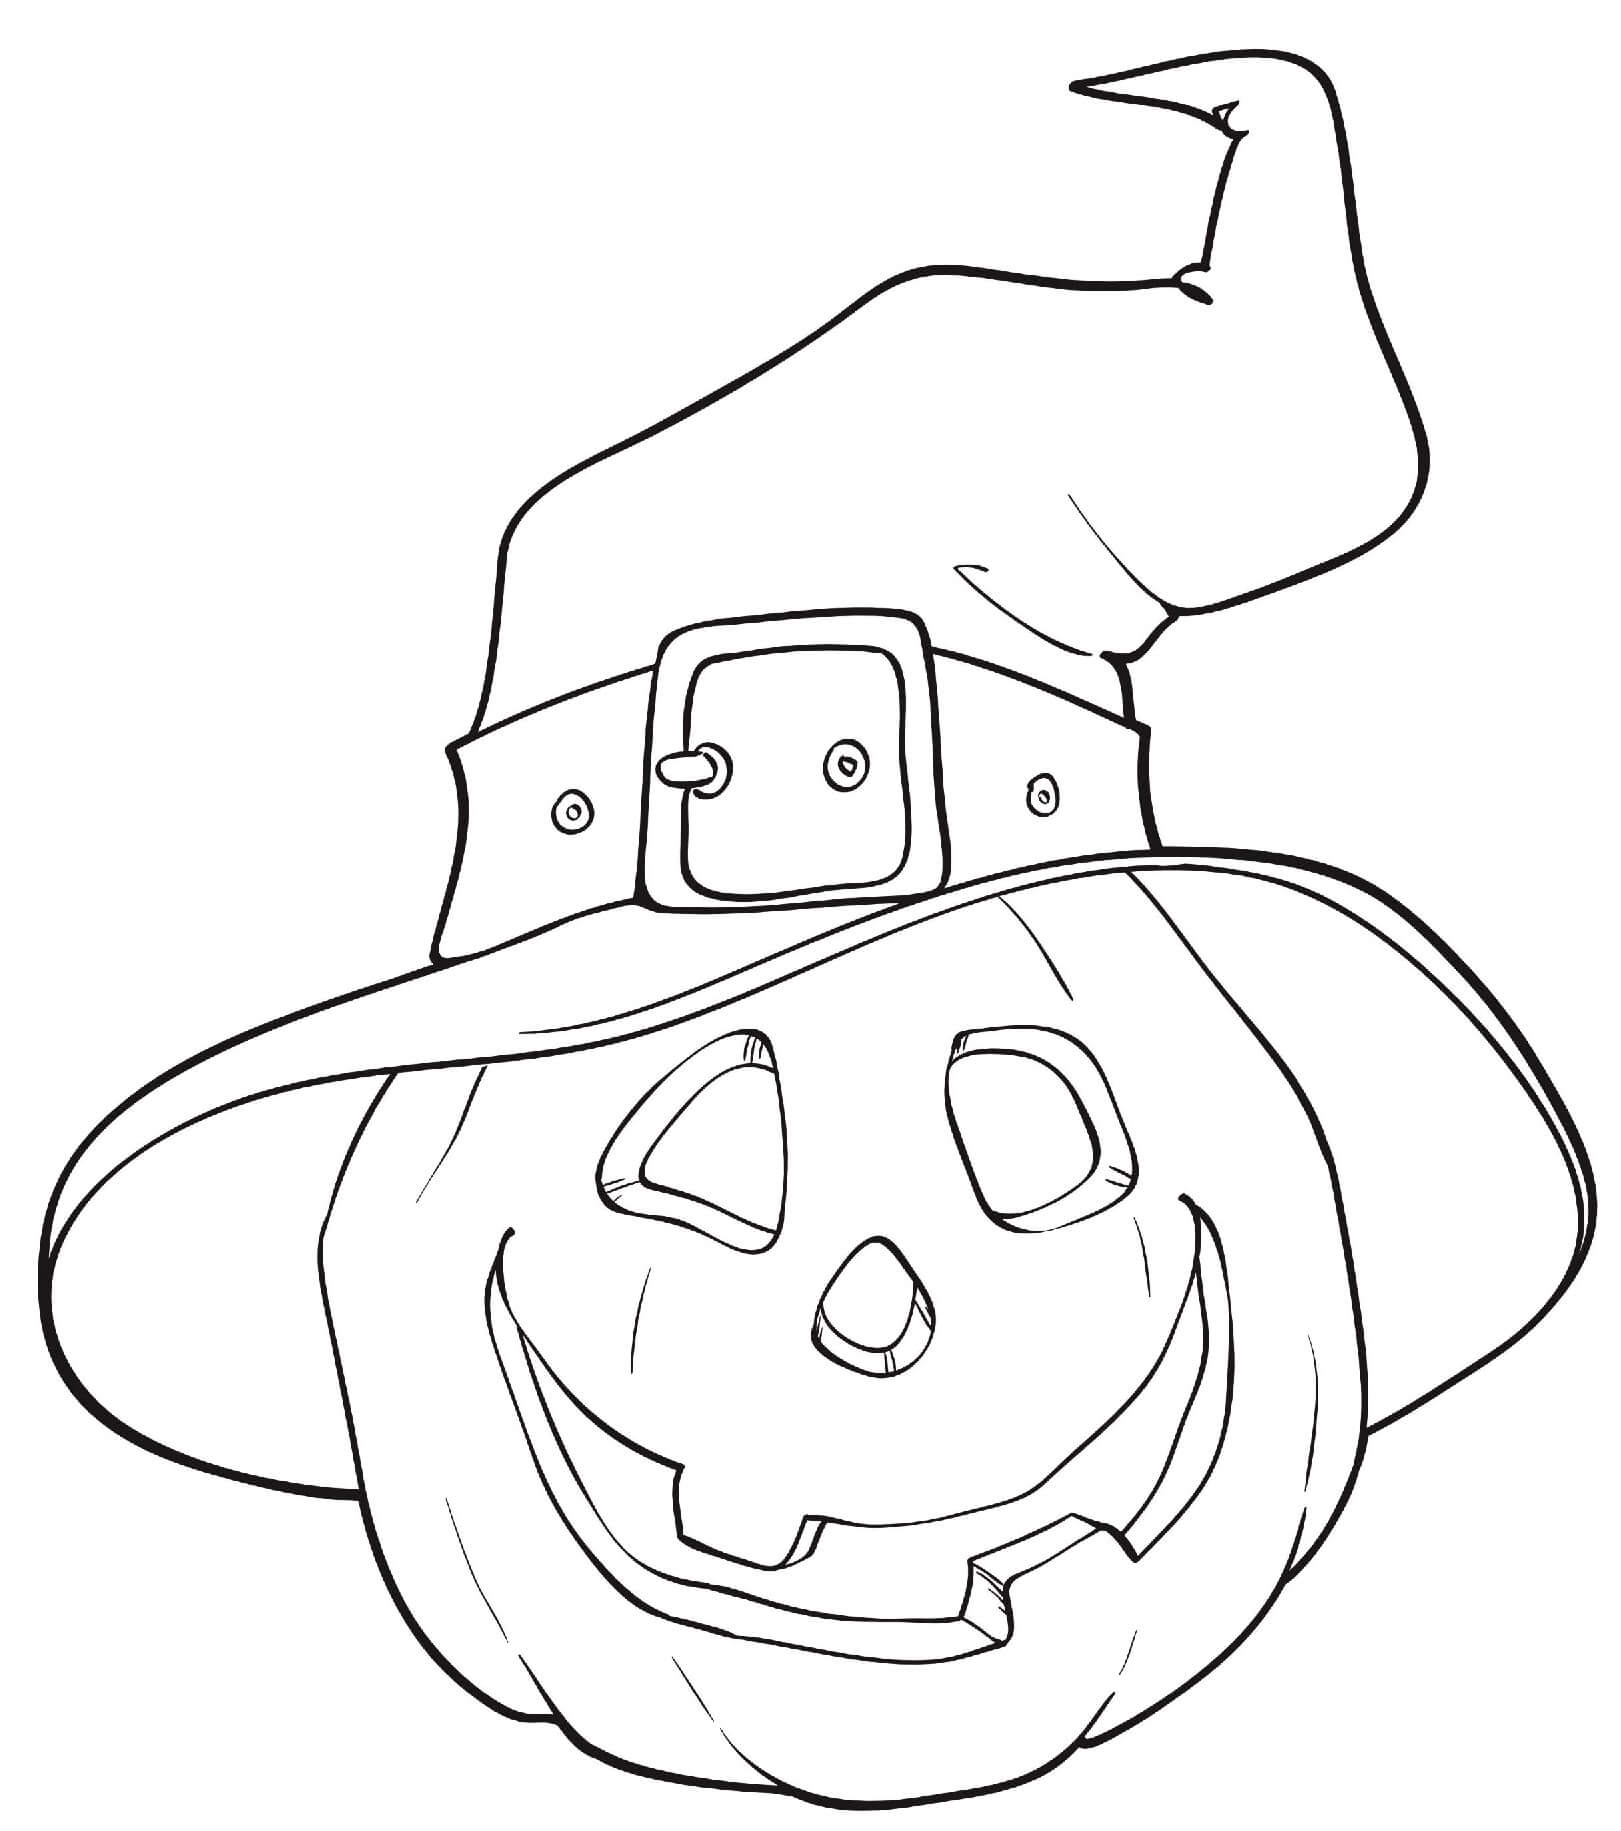 Halloween Pumpkin Witches Hat Coloring Page